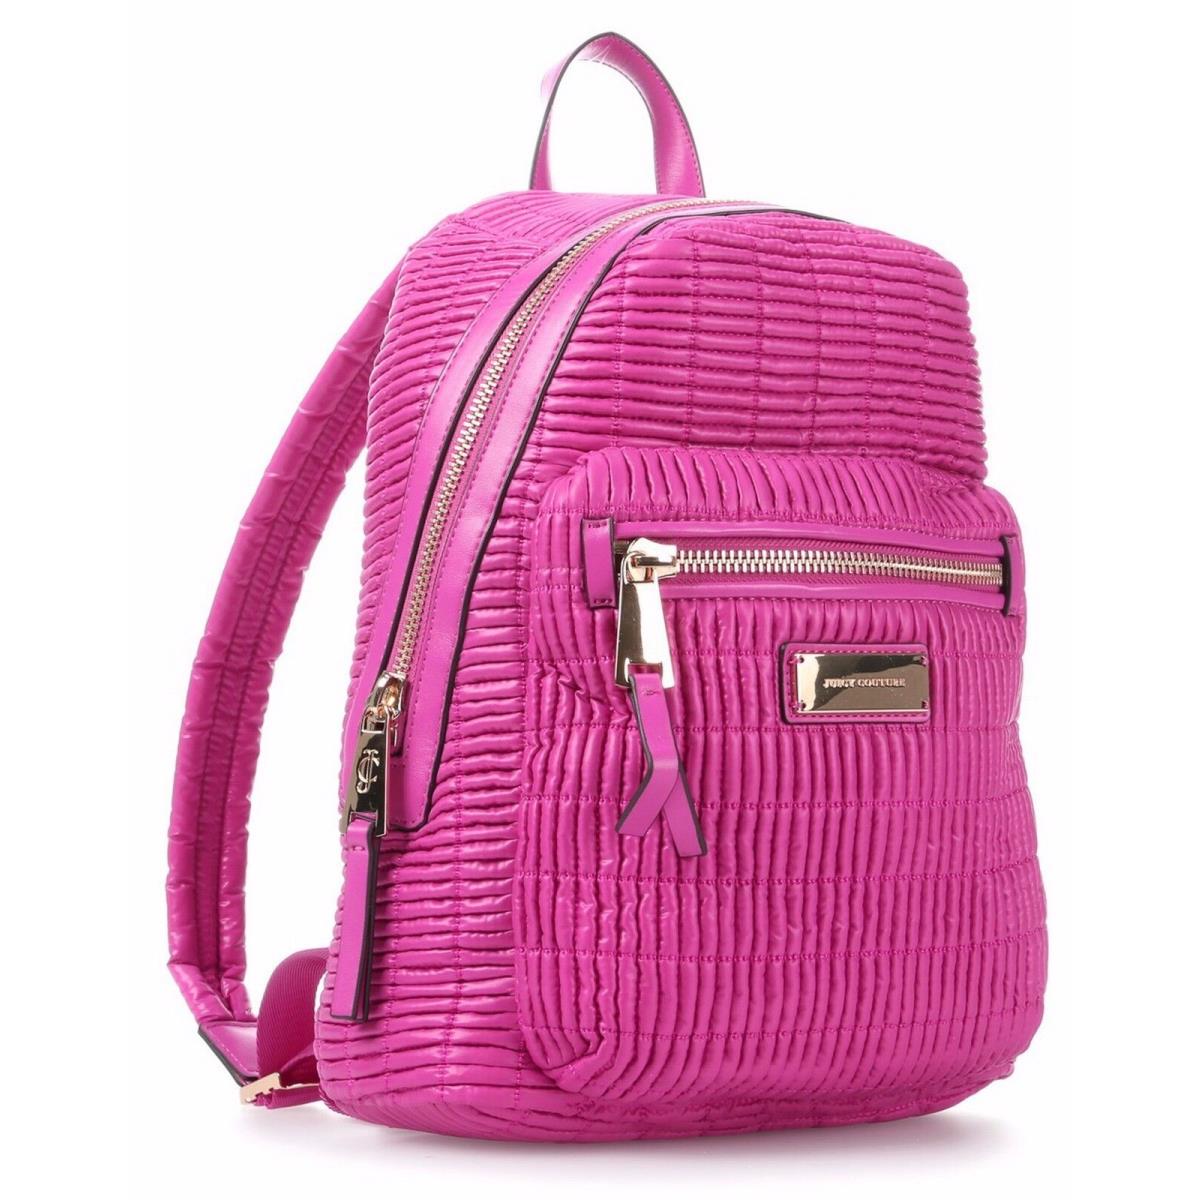 Juicy Couture Nouvelle Pop Nylon Backpack Pink